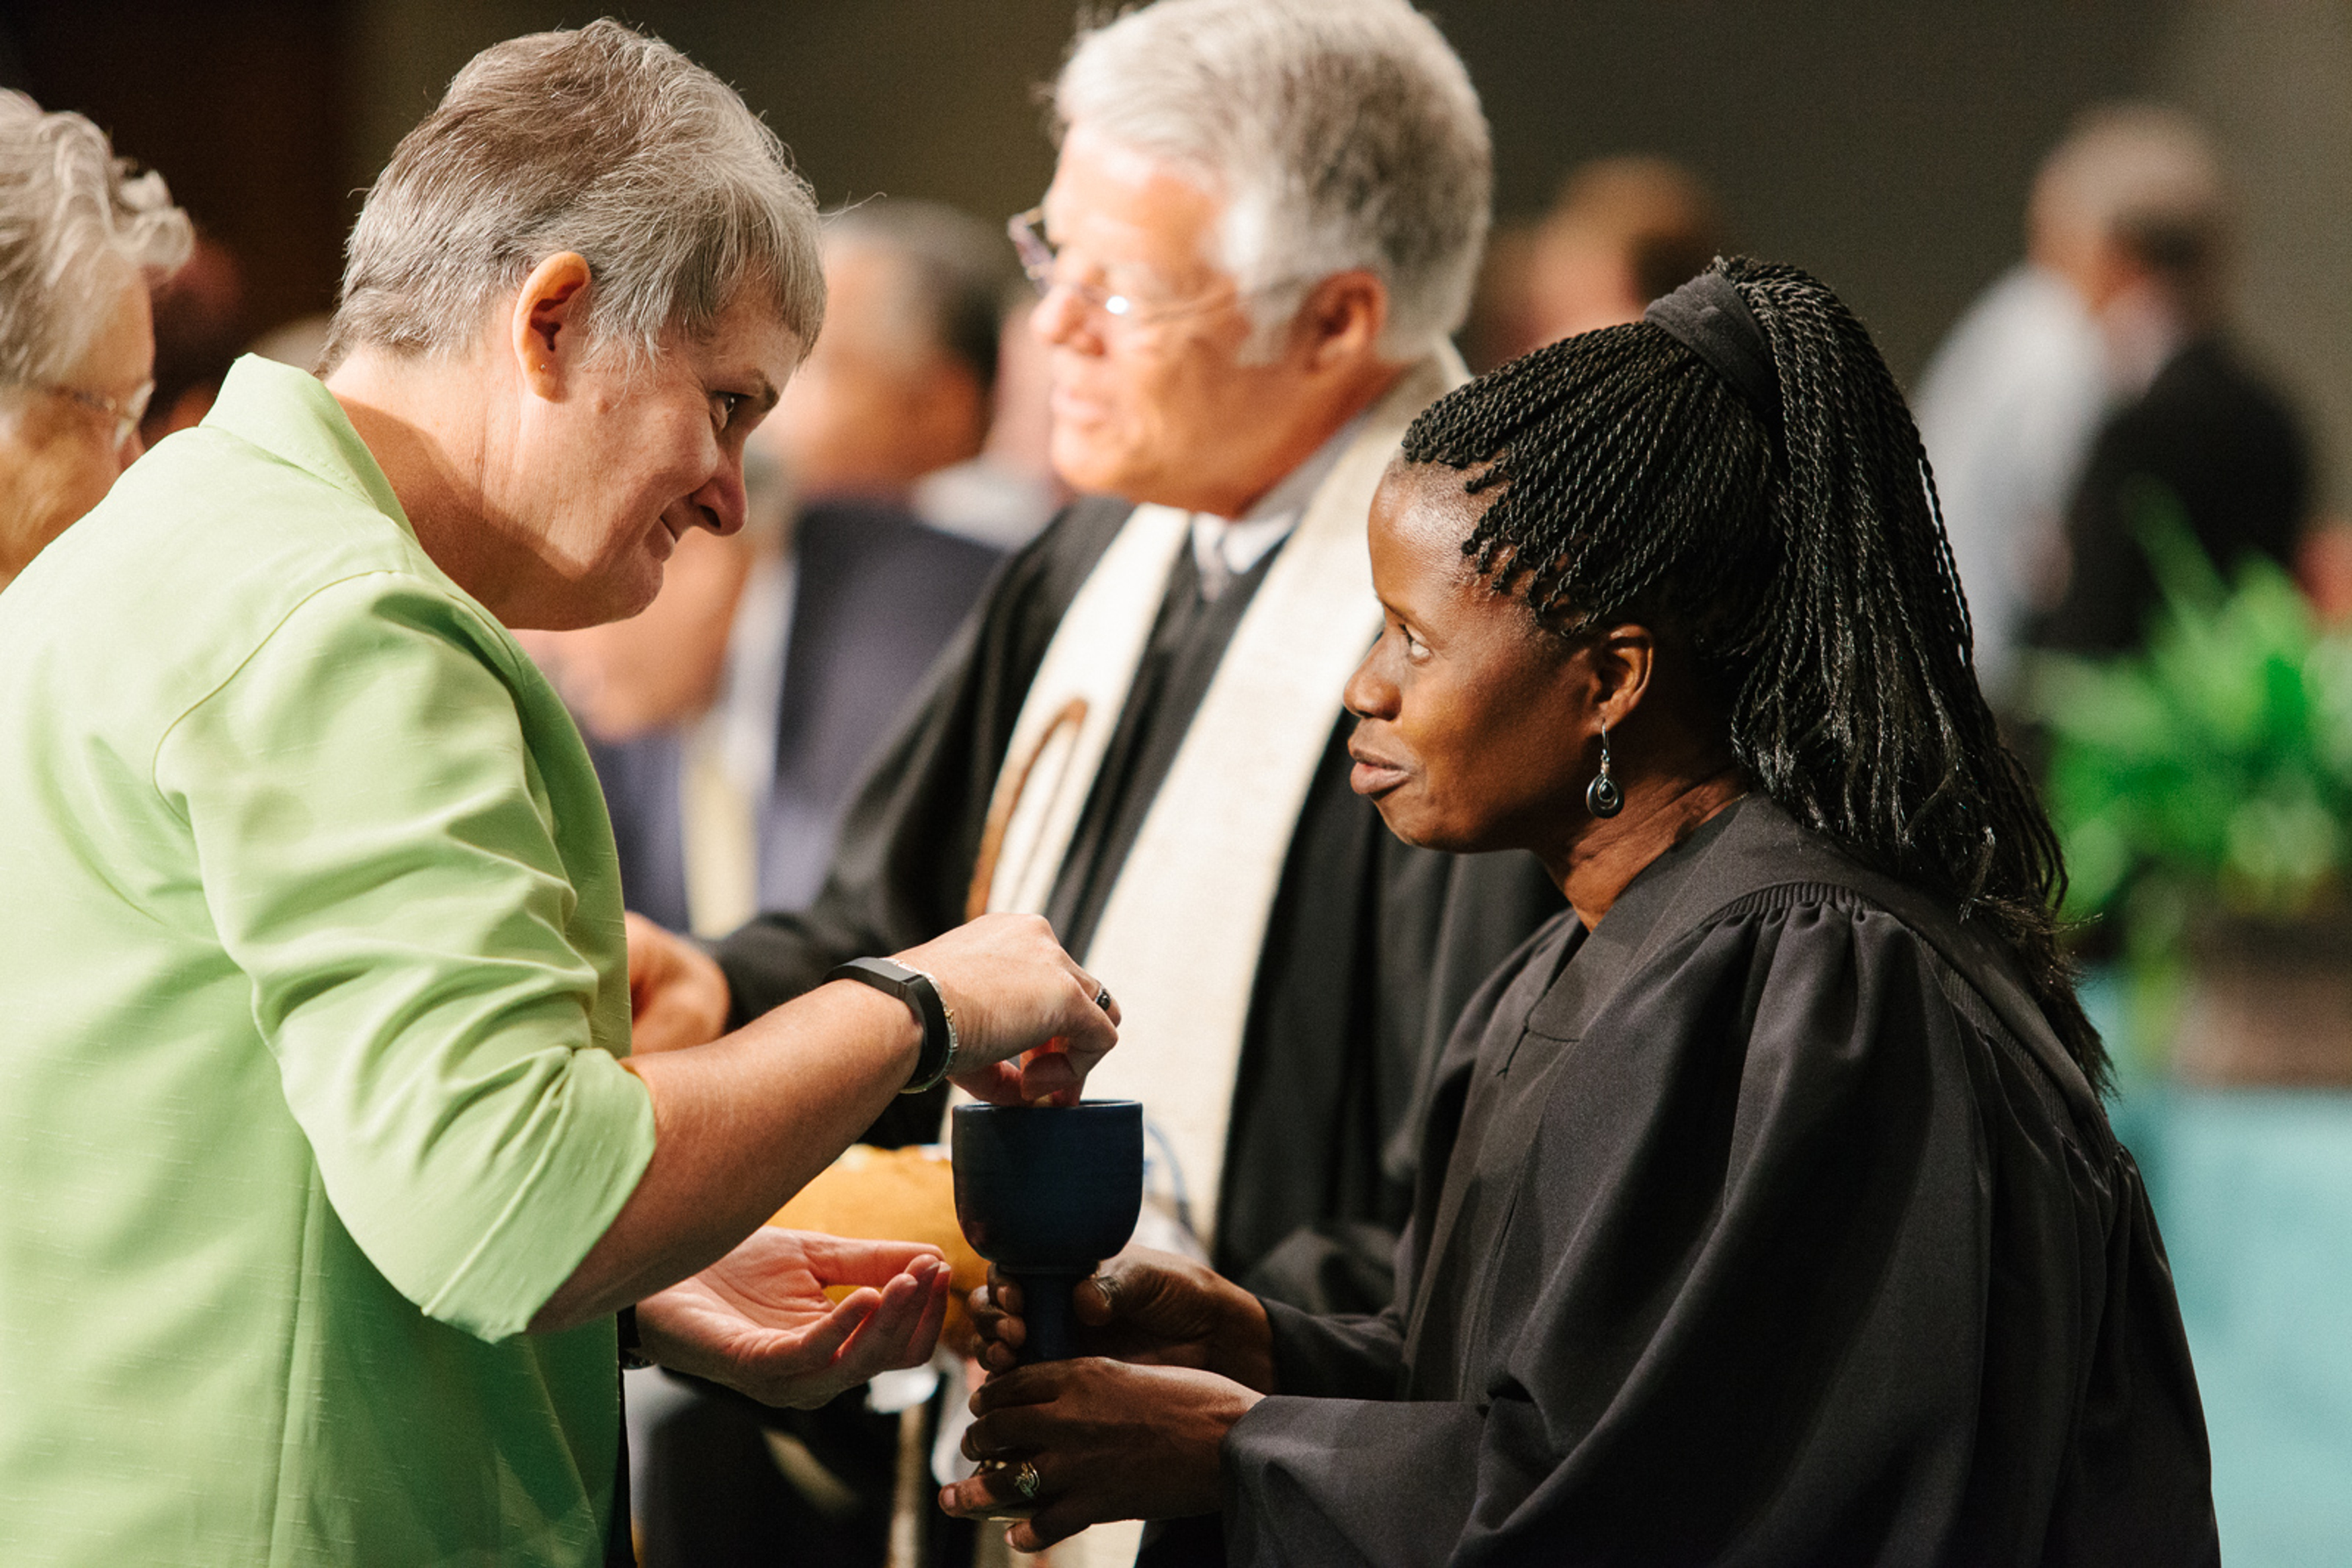 The Rev. Tonya Elmore, pastor at Enterprise First United Methodist Church, takes communion from the Rev. Virginia Kagoro, pastor at Locust Bluff United Methodist Church during the 2015 Alabama-West Florida Conference. Photo by Luke Lucas, Alabama-West Florida Conference.